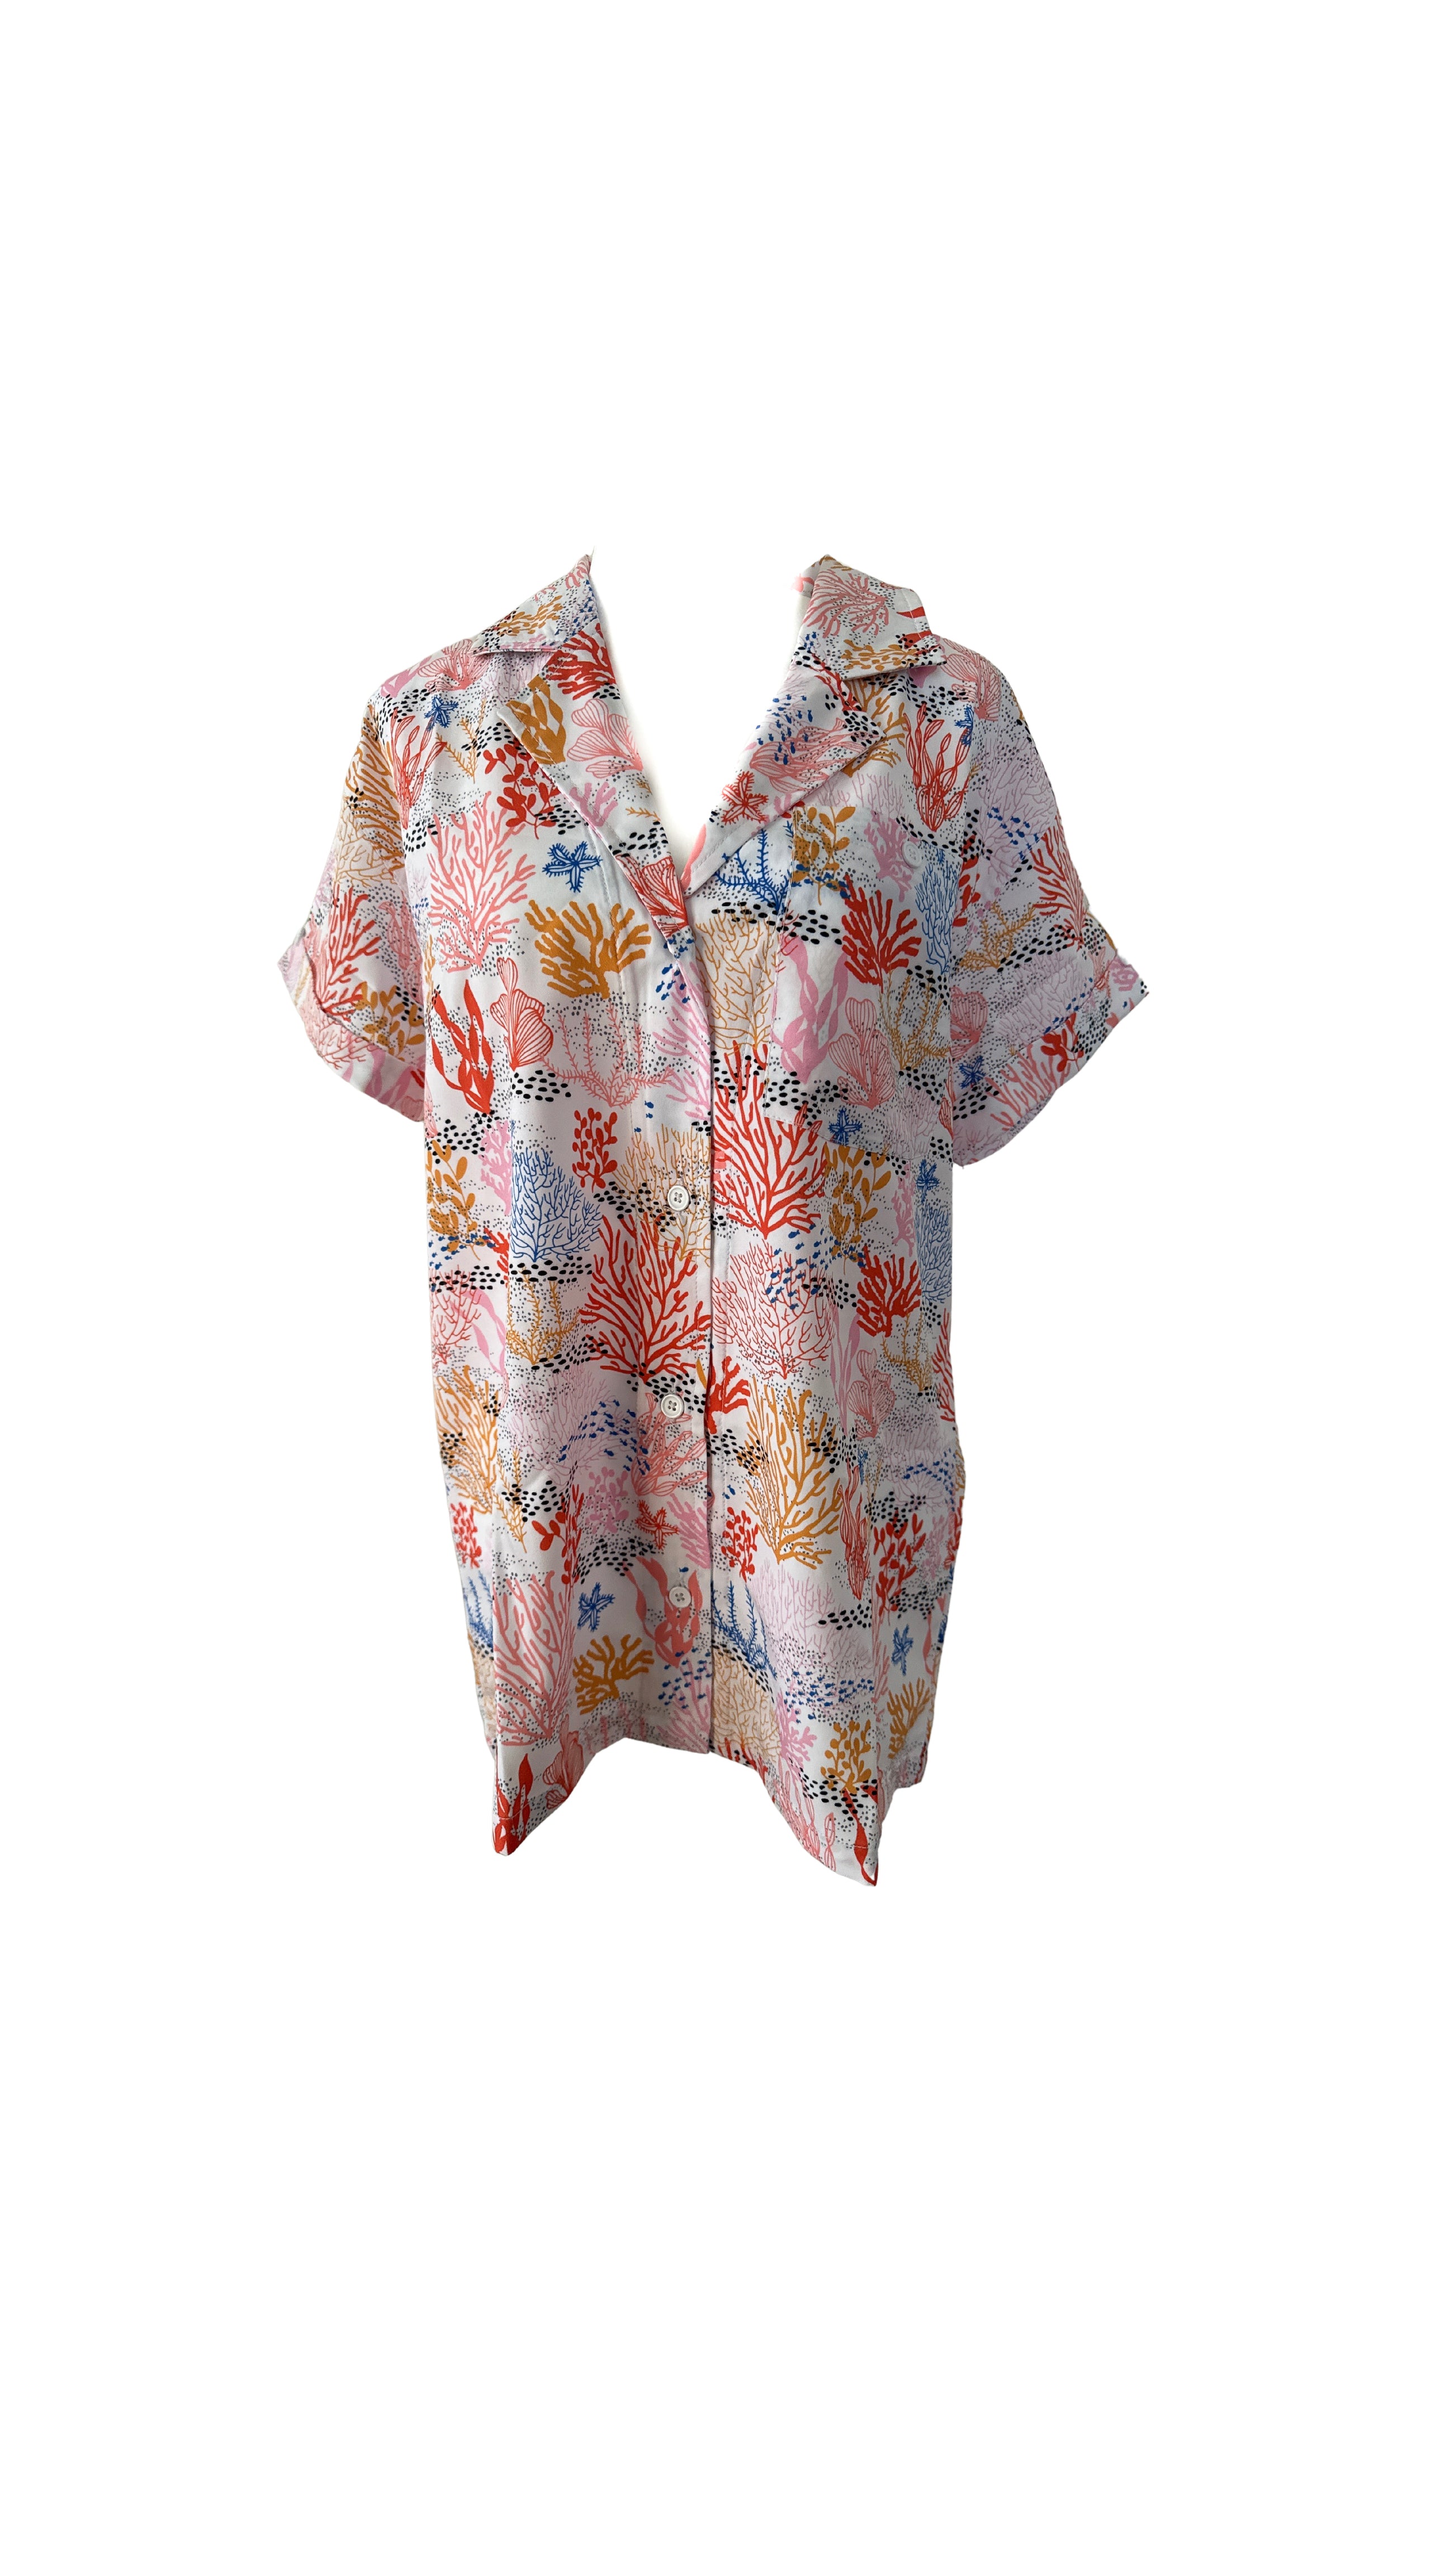 Coral Reef Relaxed Fit Cover Up Shirt